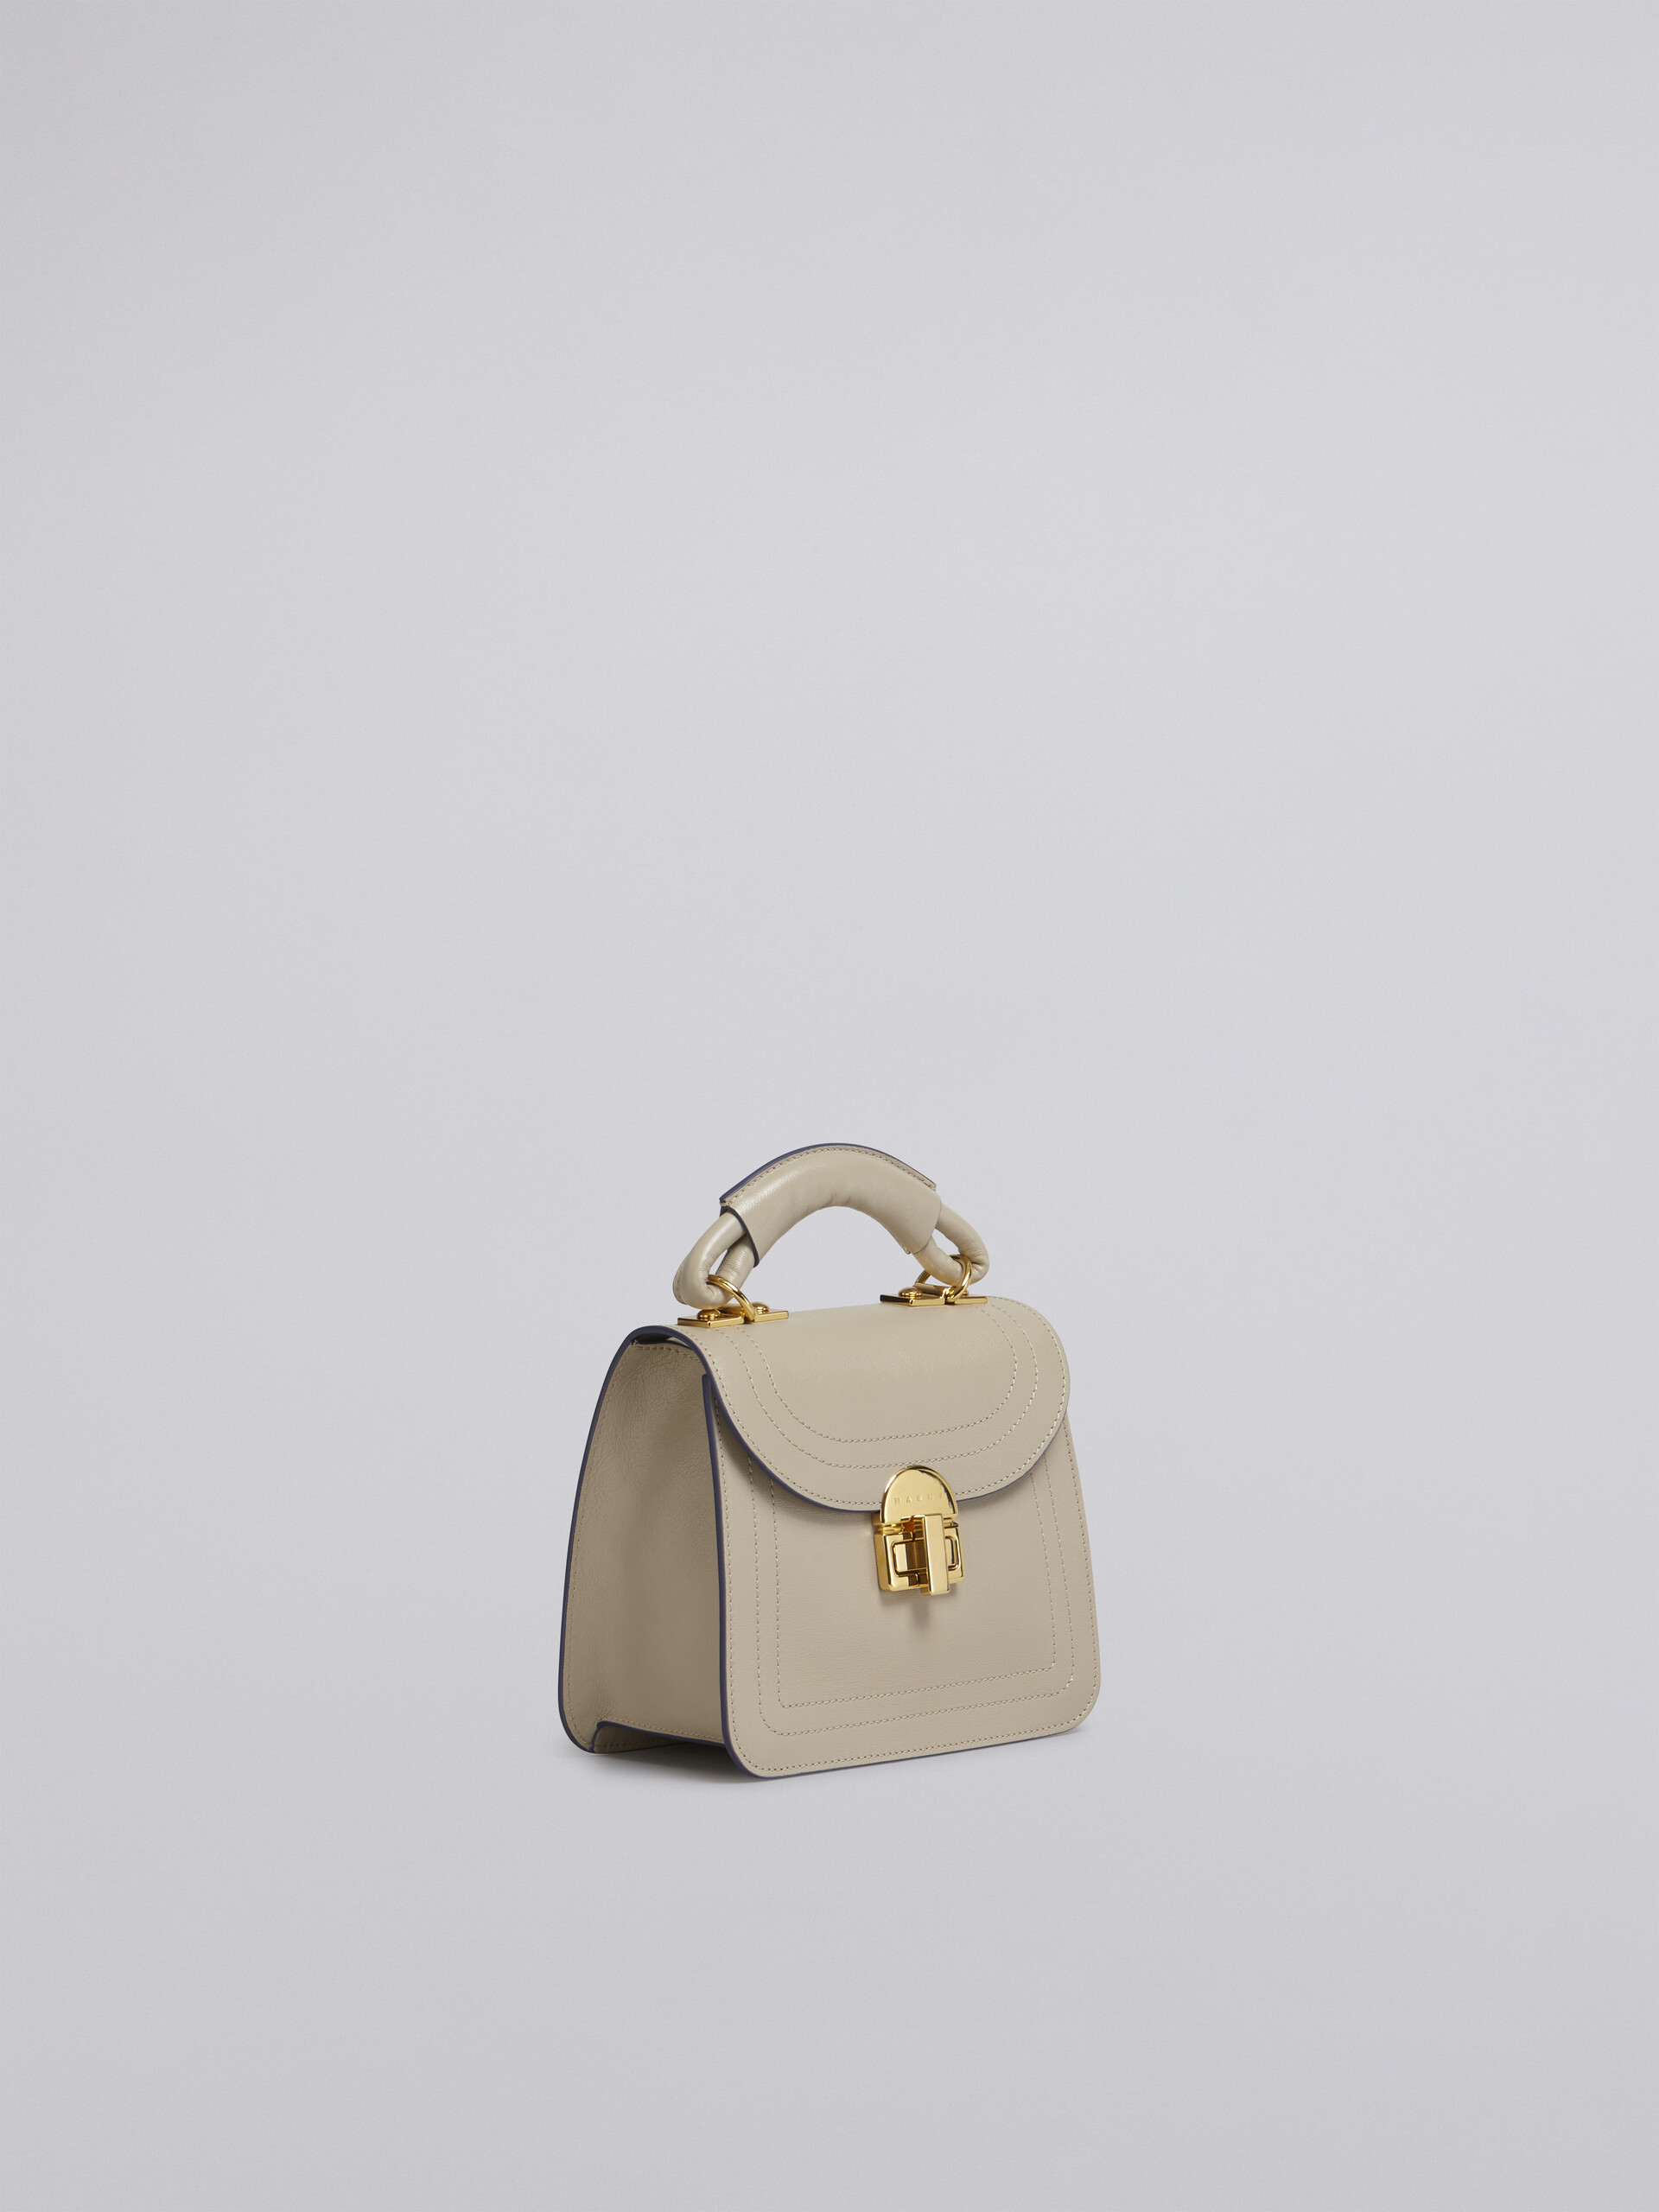 JULIETTE backpack in tumbled calf leather - Backpacks - Image 6